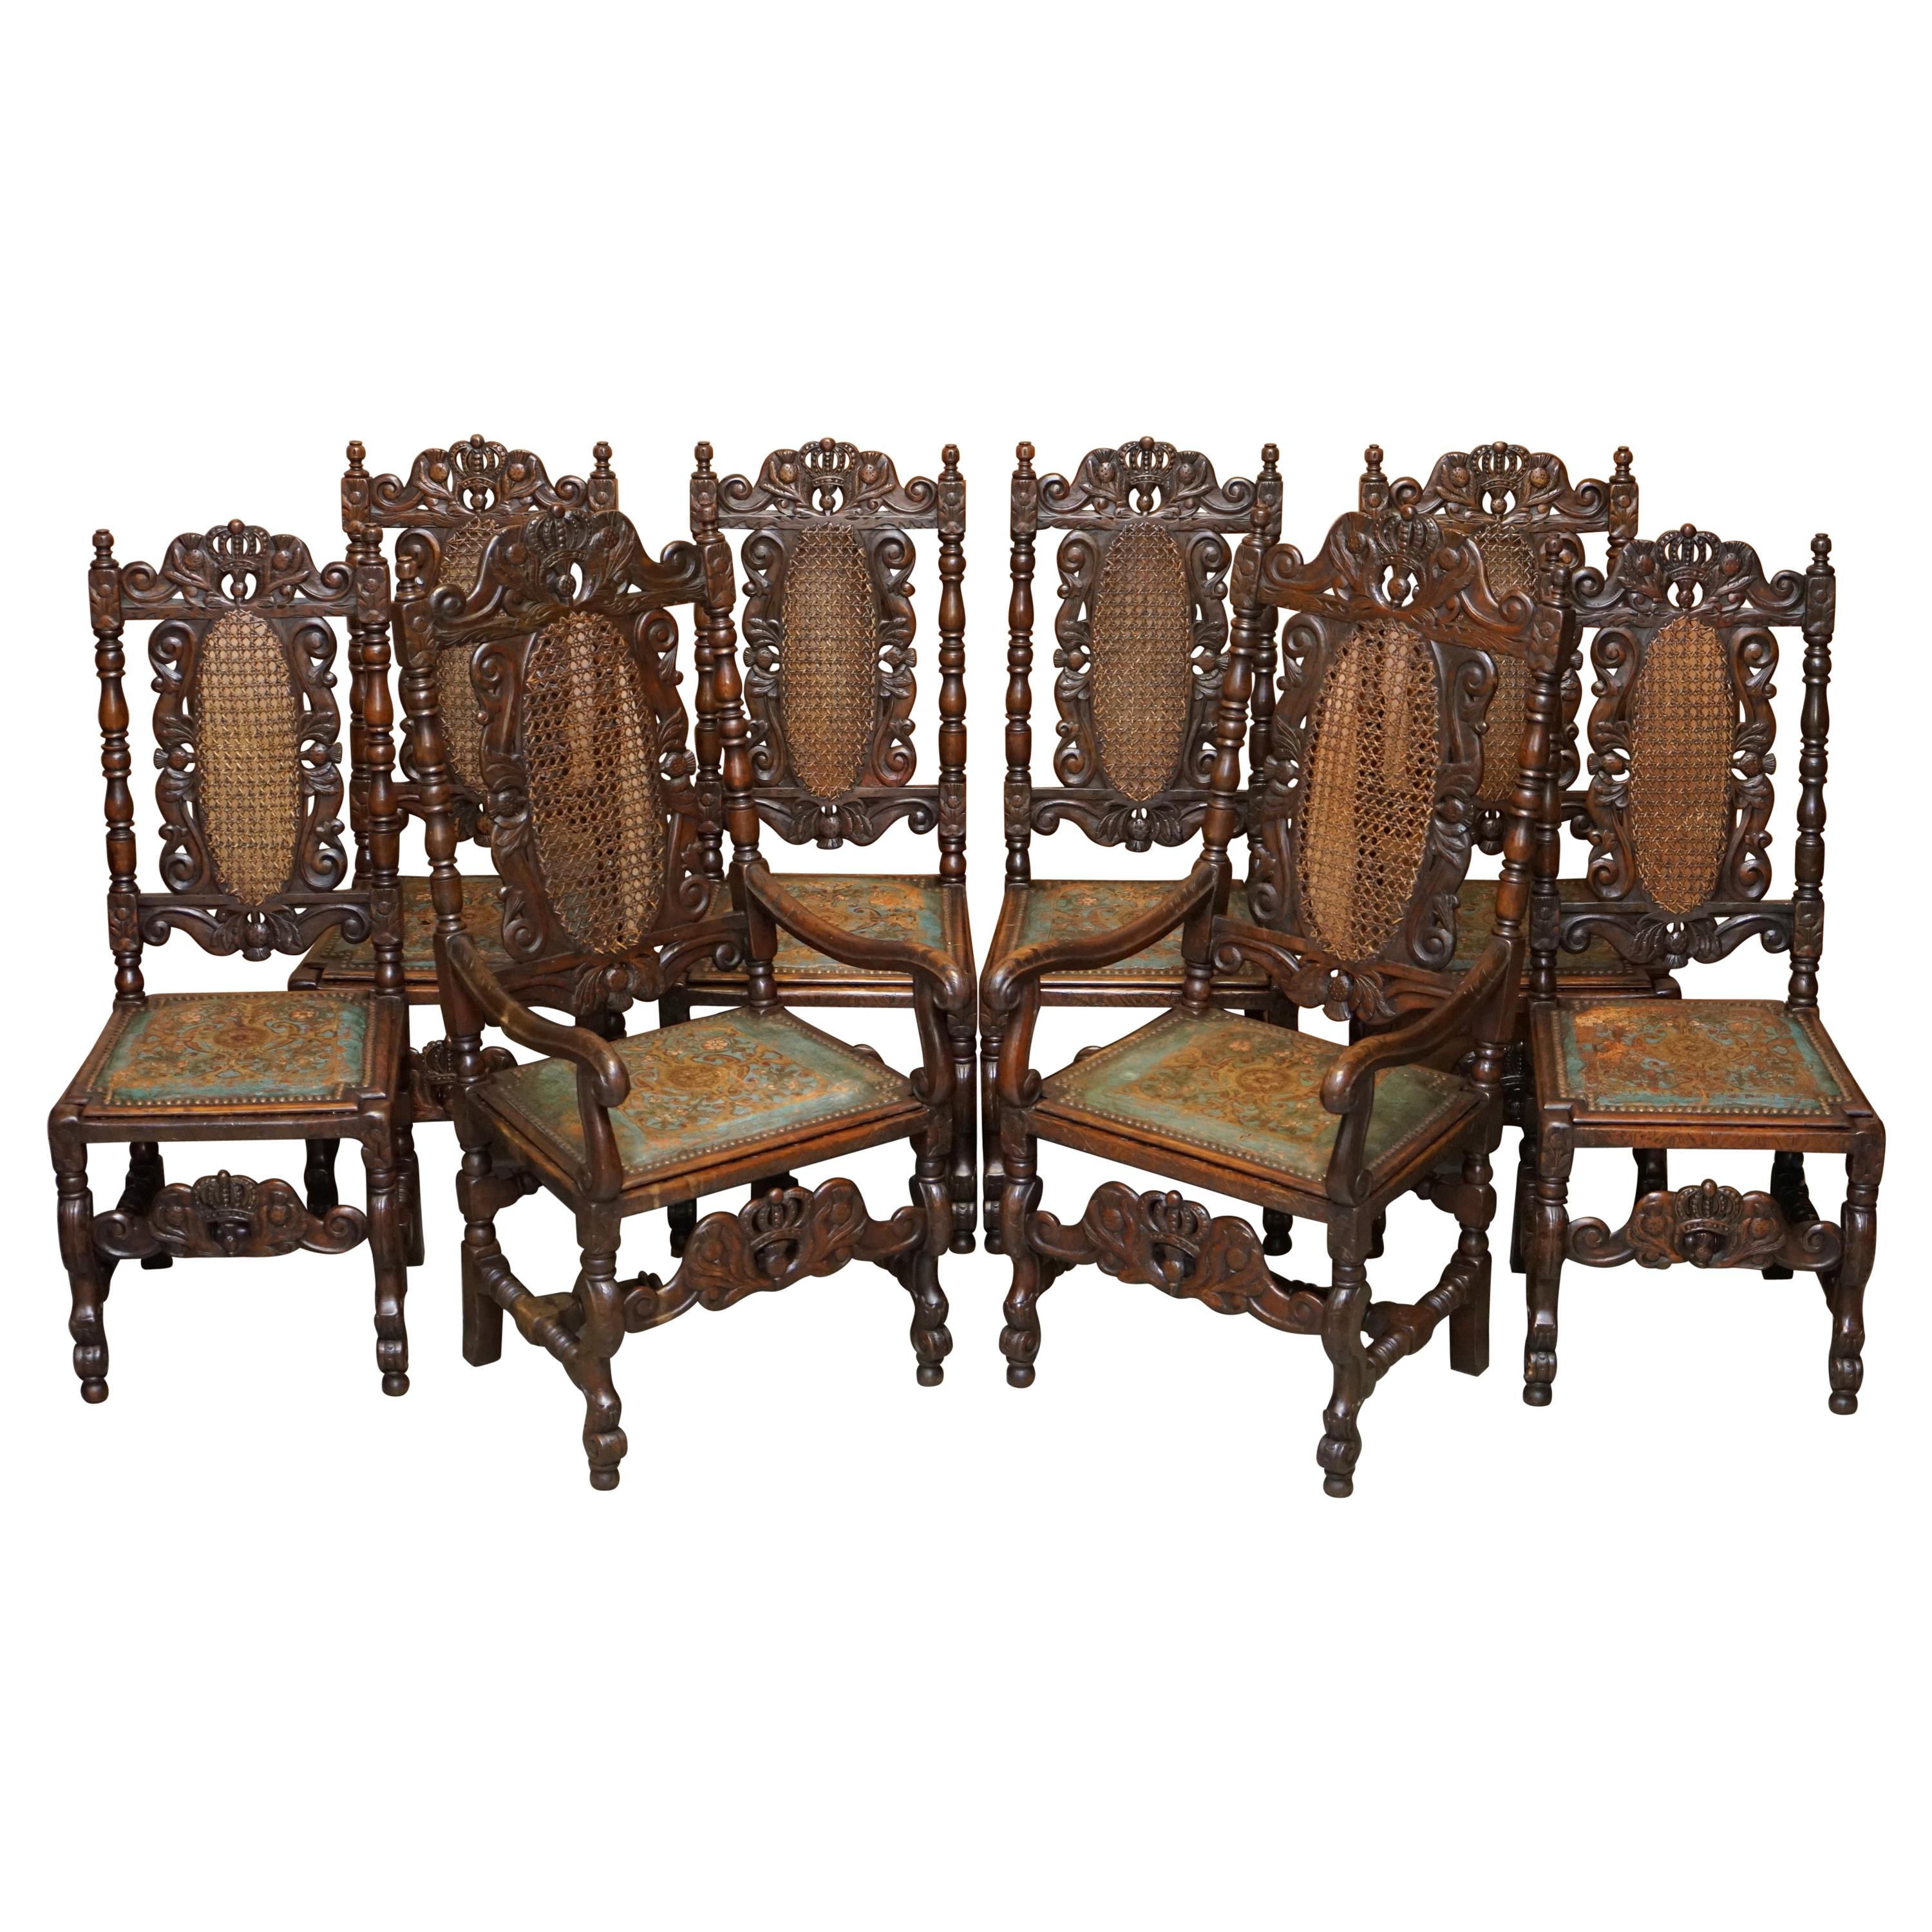 Eight Carved Jacobean Throne Dining Chairs Hand Painted & Embossed Leather Seats